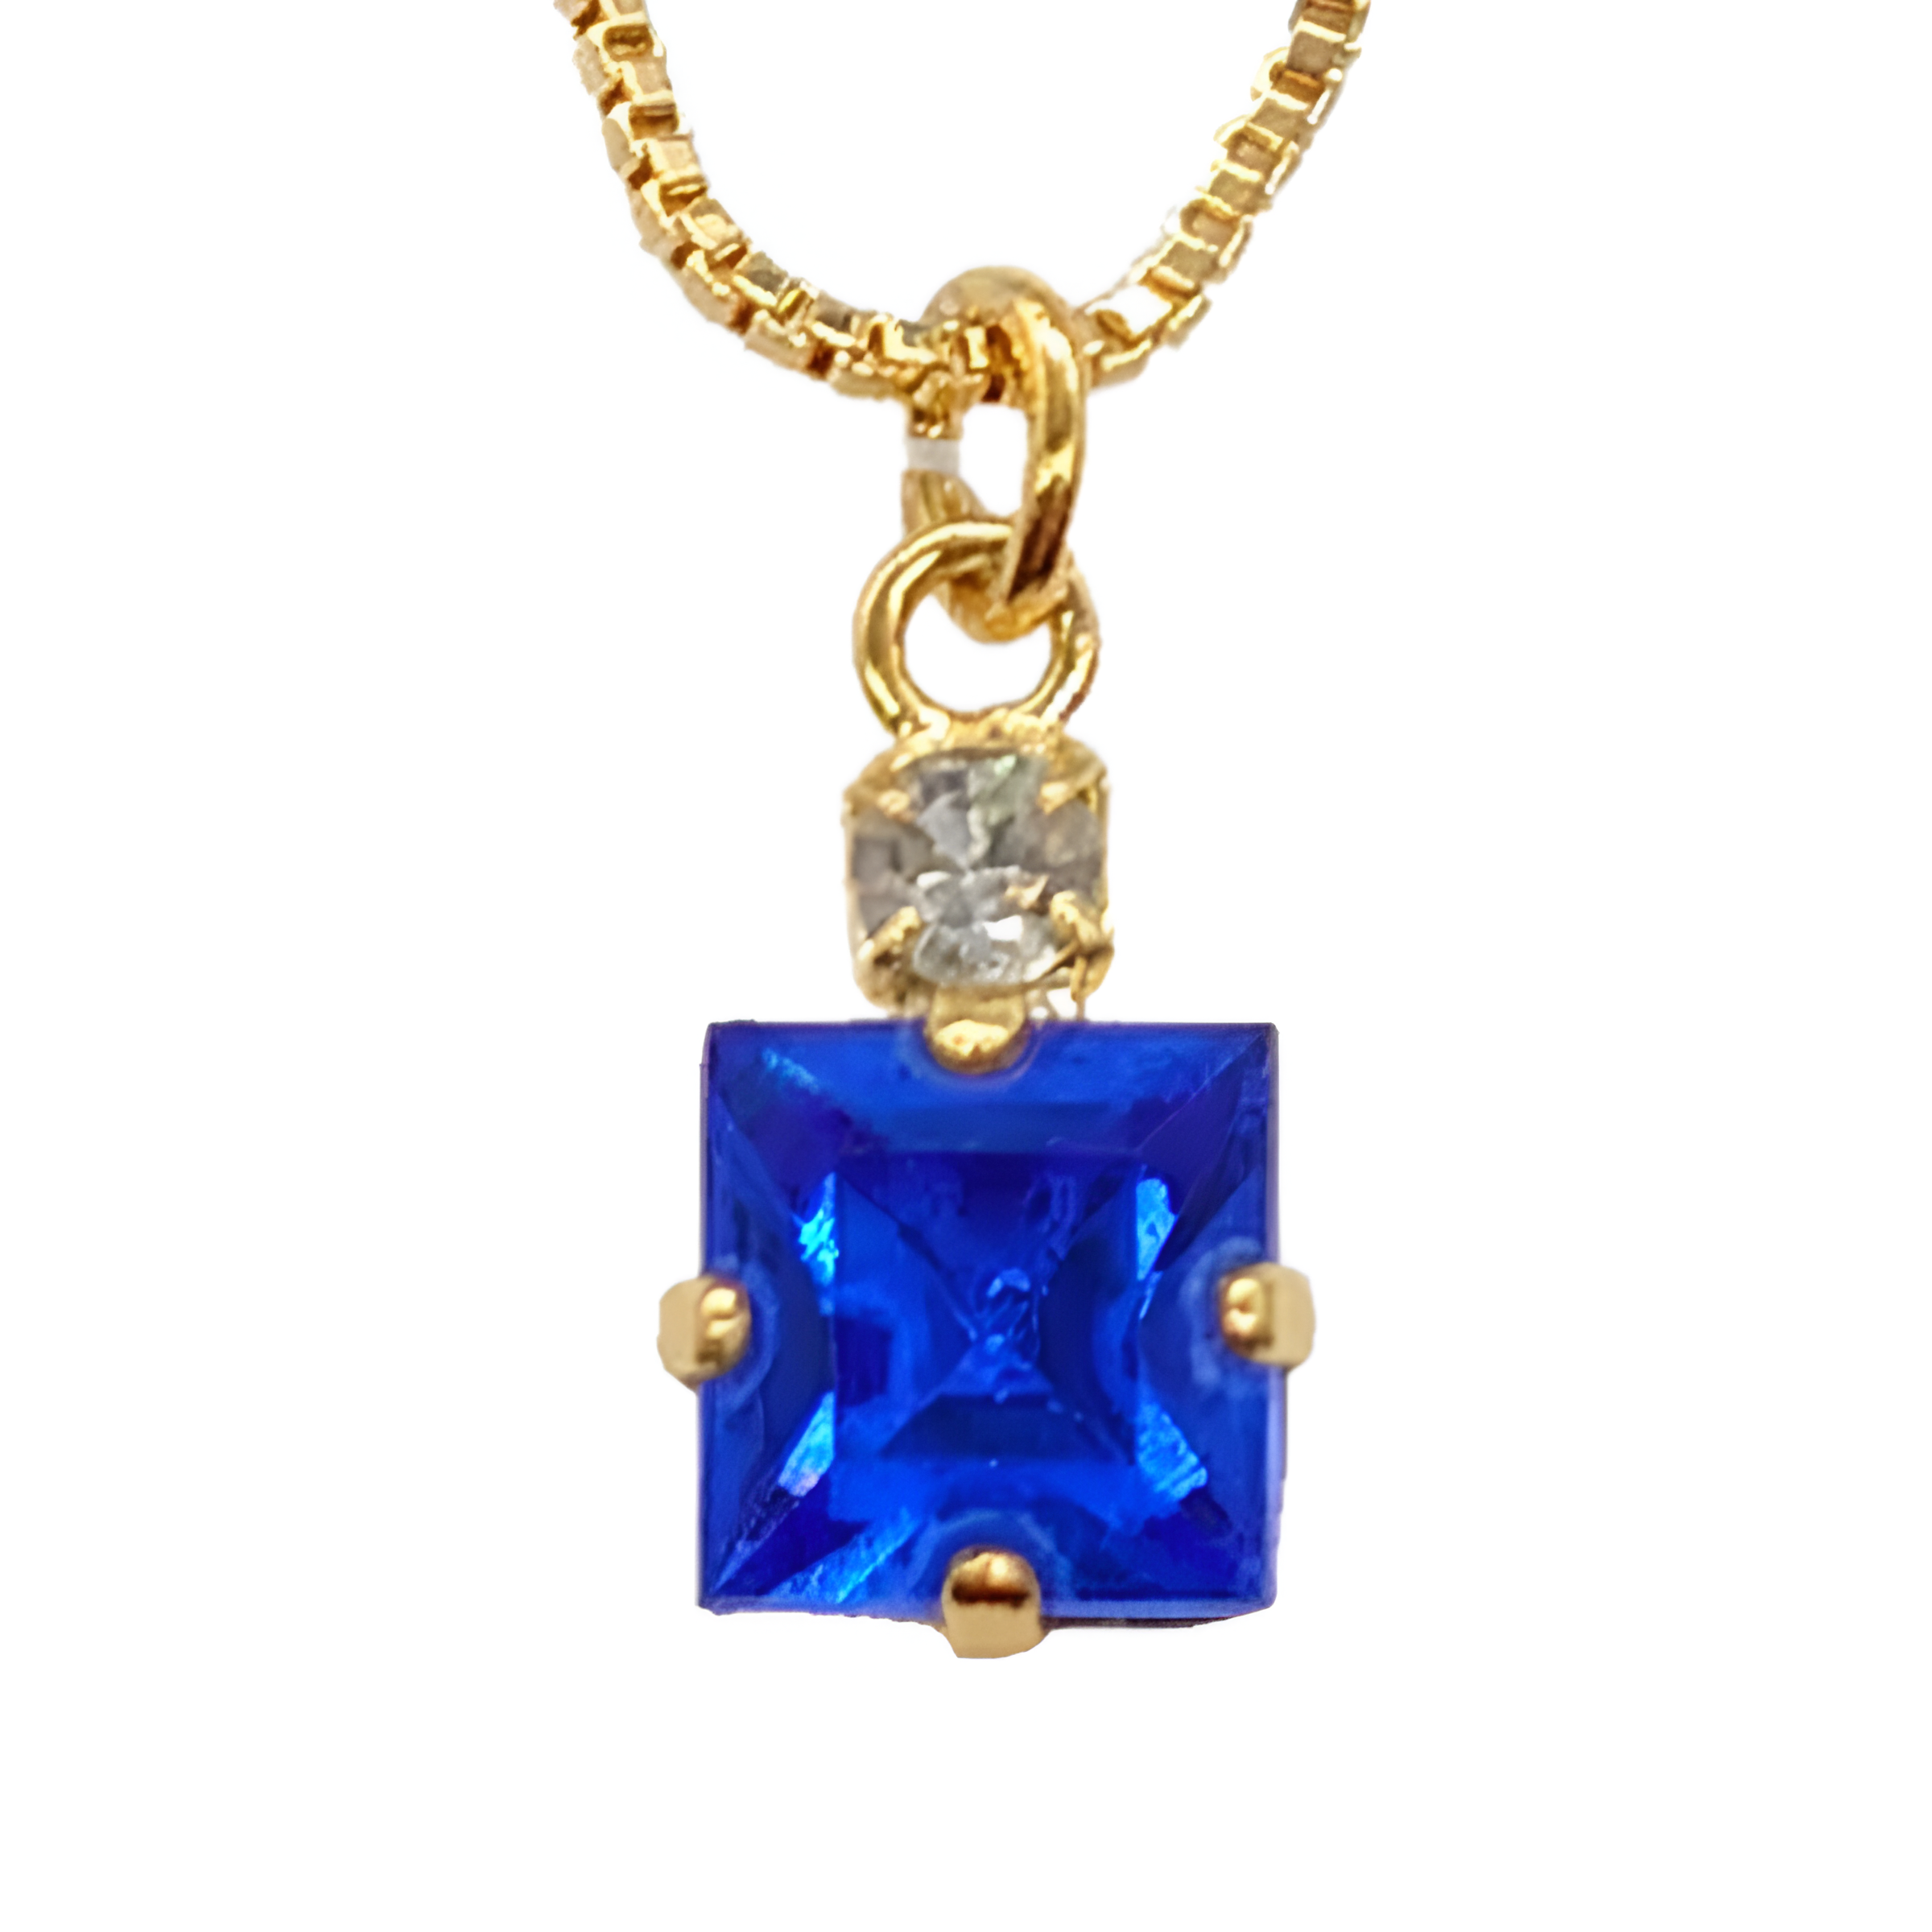 Small Swarovski Crystals Square Pendant With Gold Fittings